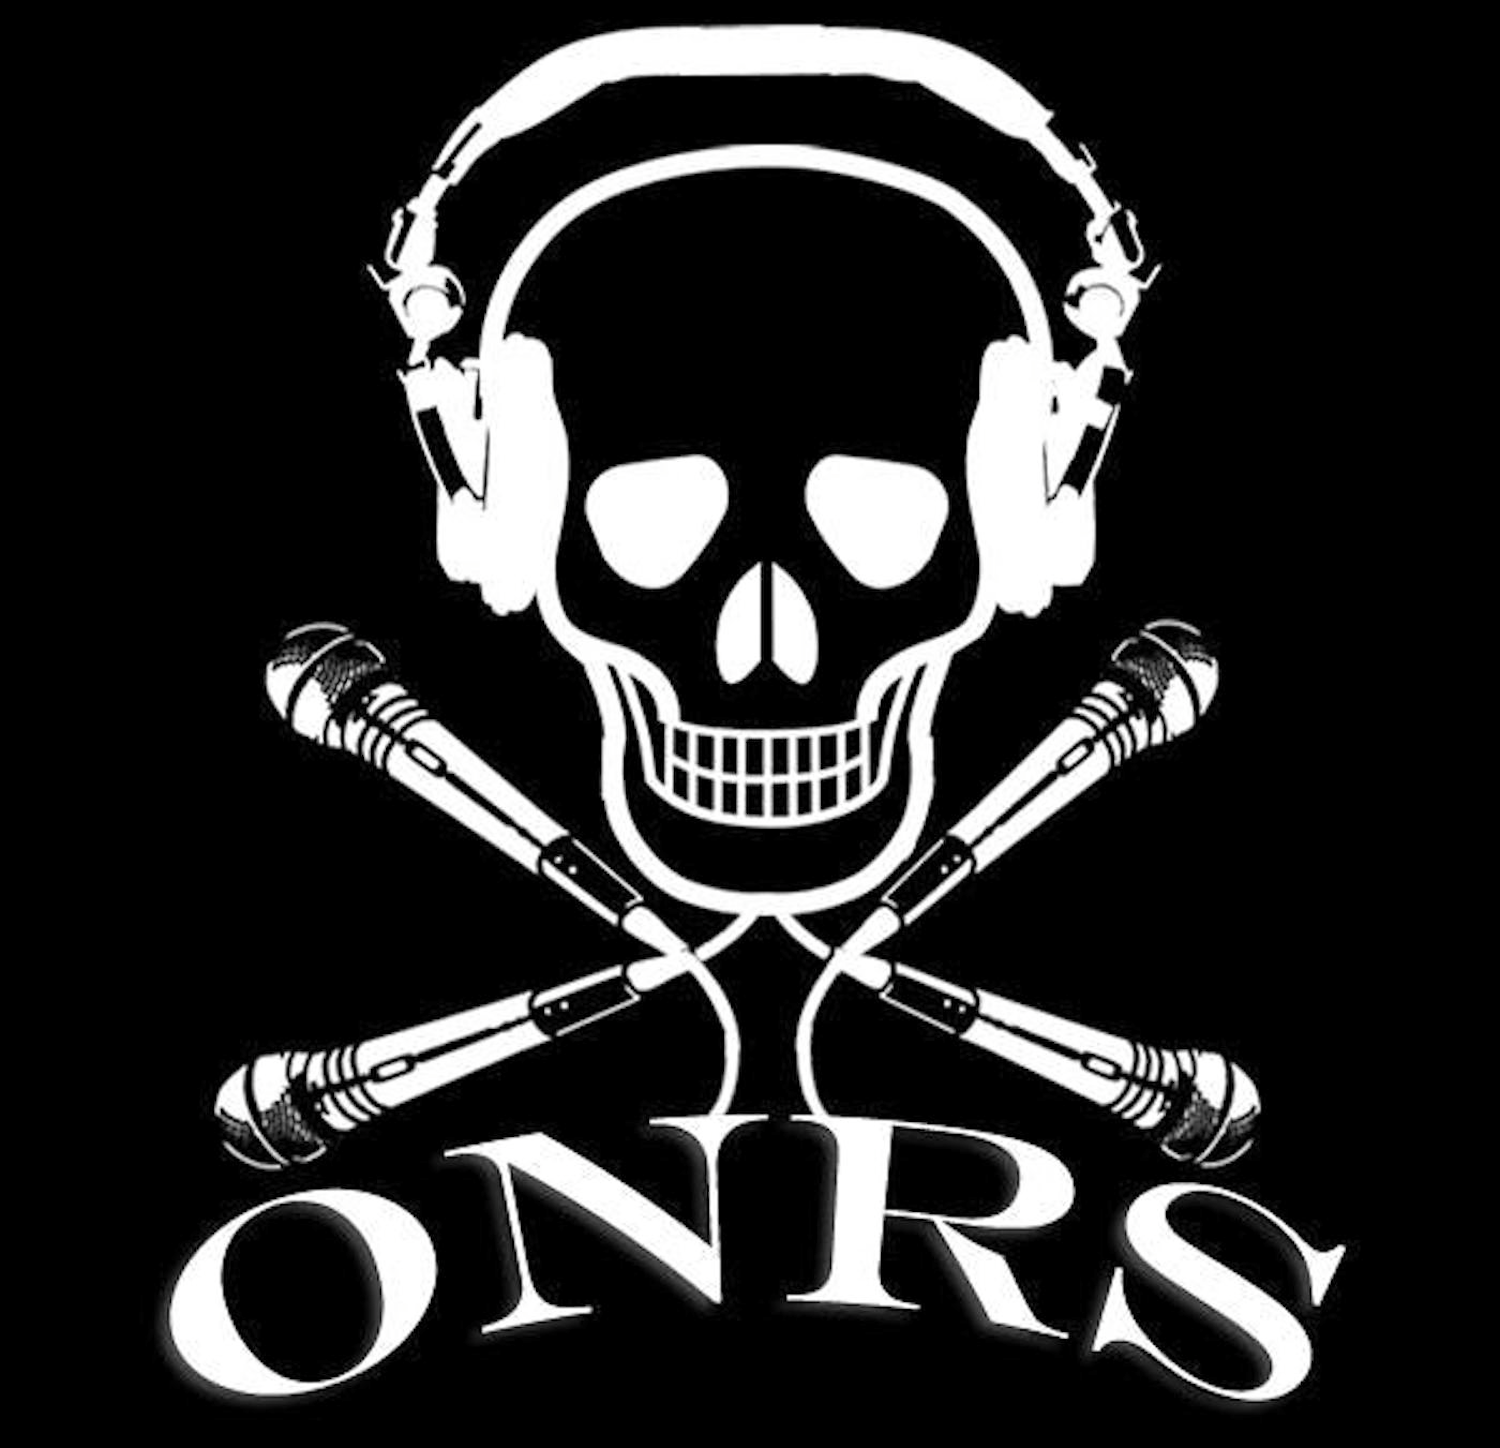 ONRS - EP362 - Ranch seasoning and the most liked person alive